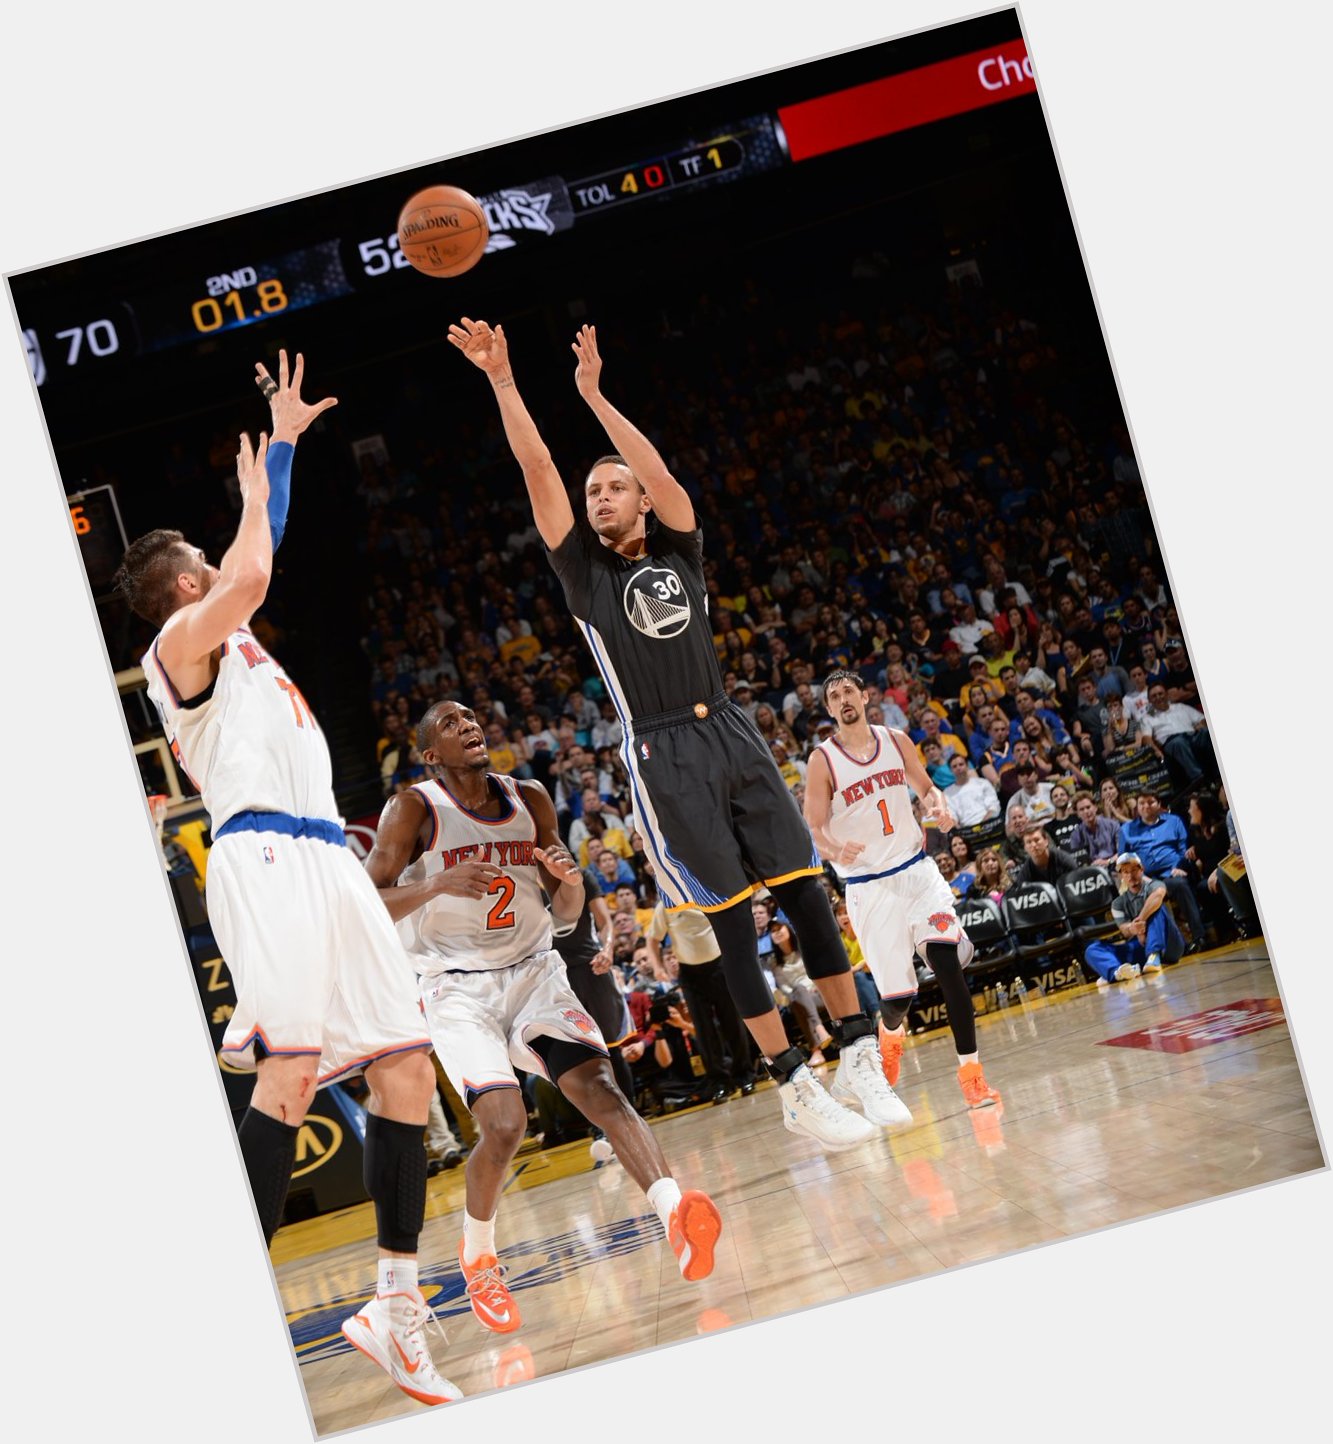 \" Stephen Curry beats the buzzer to lead Saturday\s Top 10 Plays:   Happy Birthday